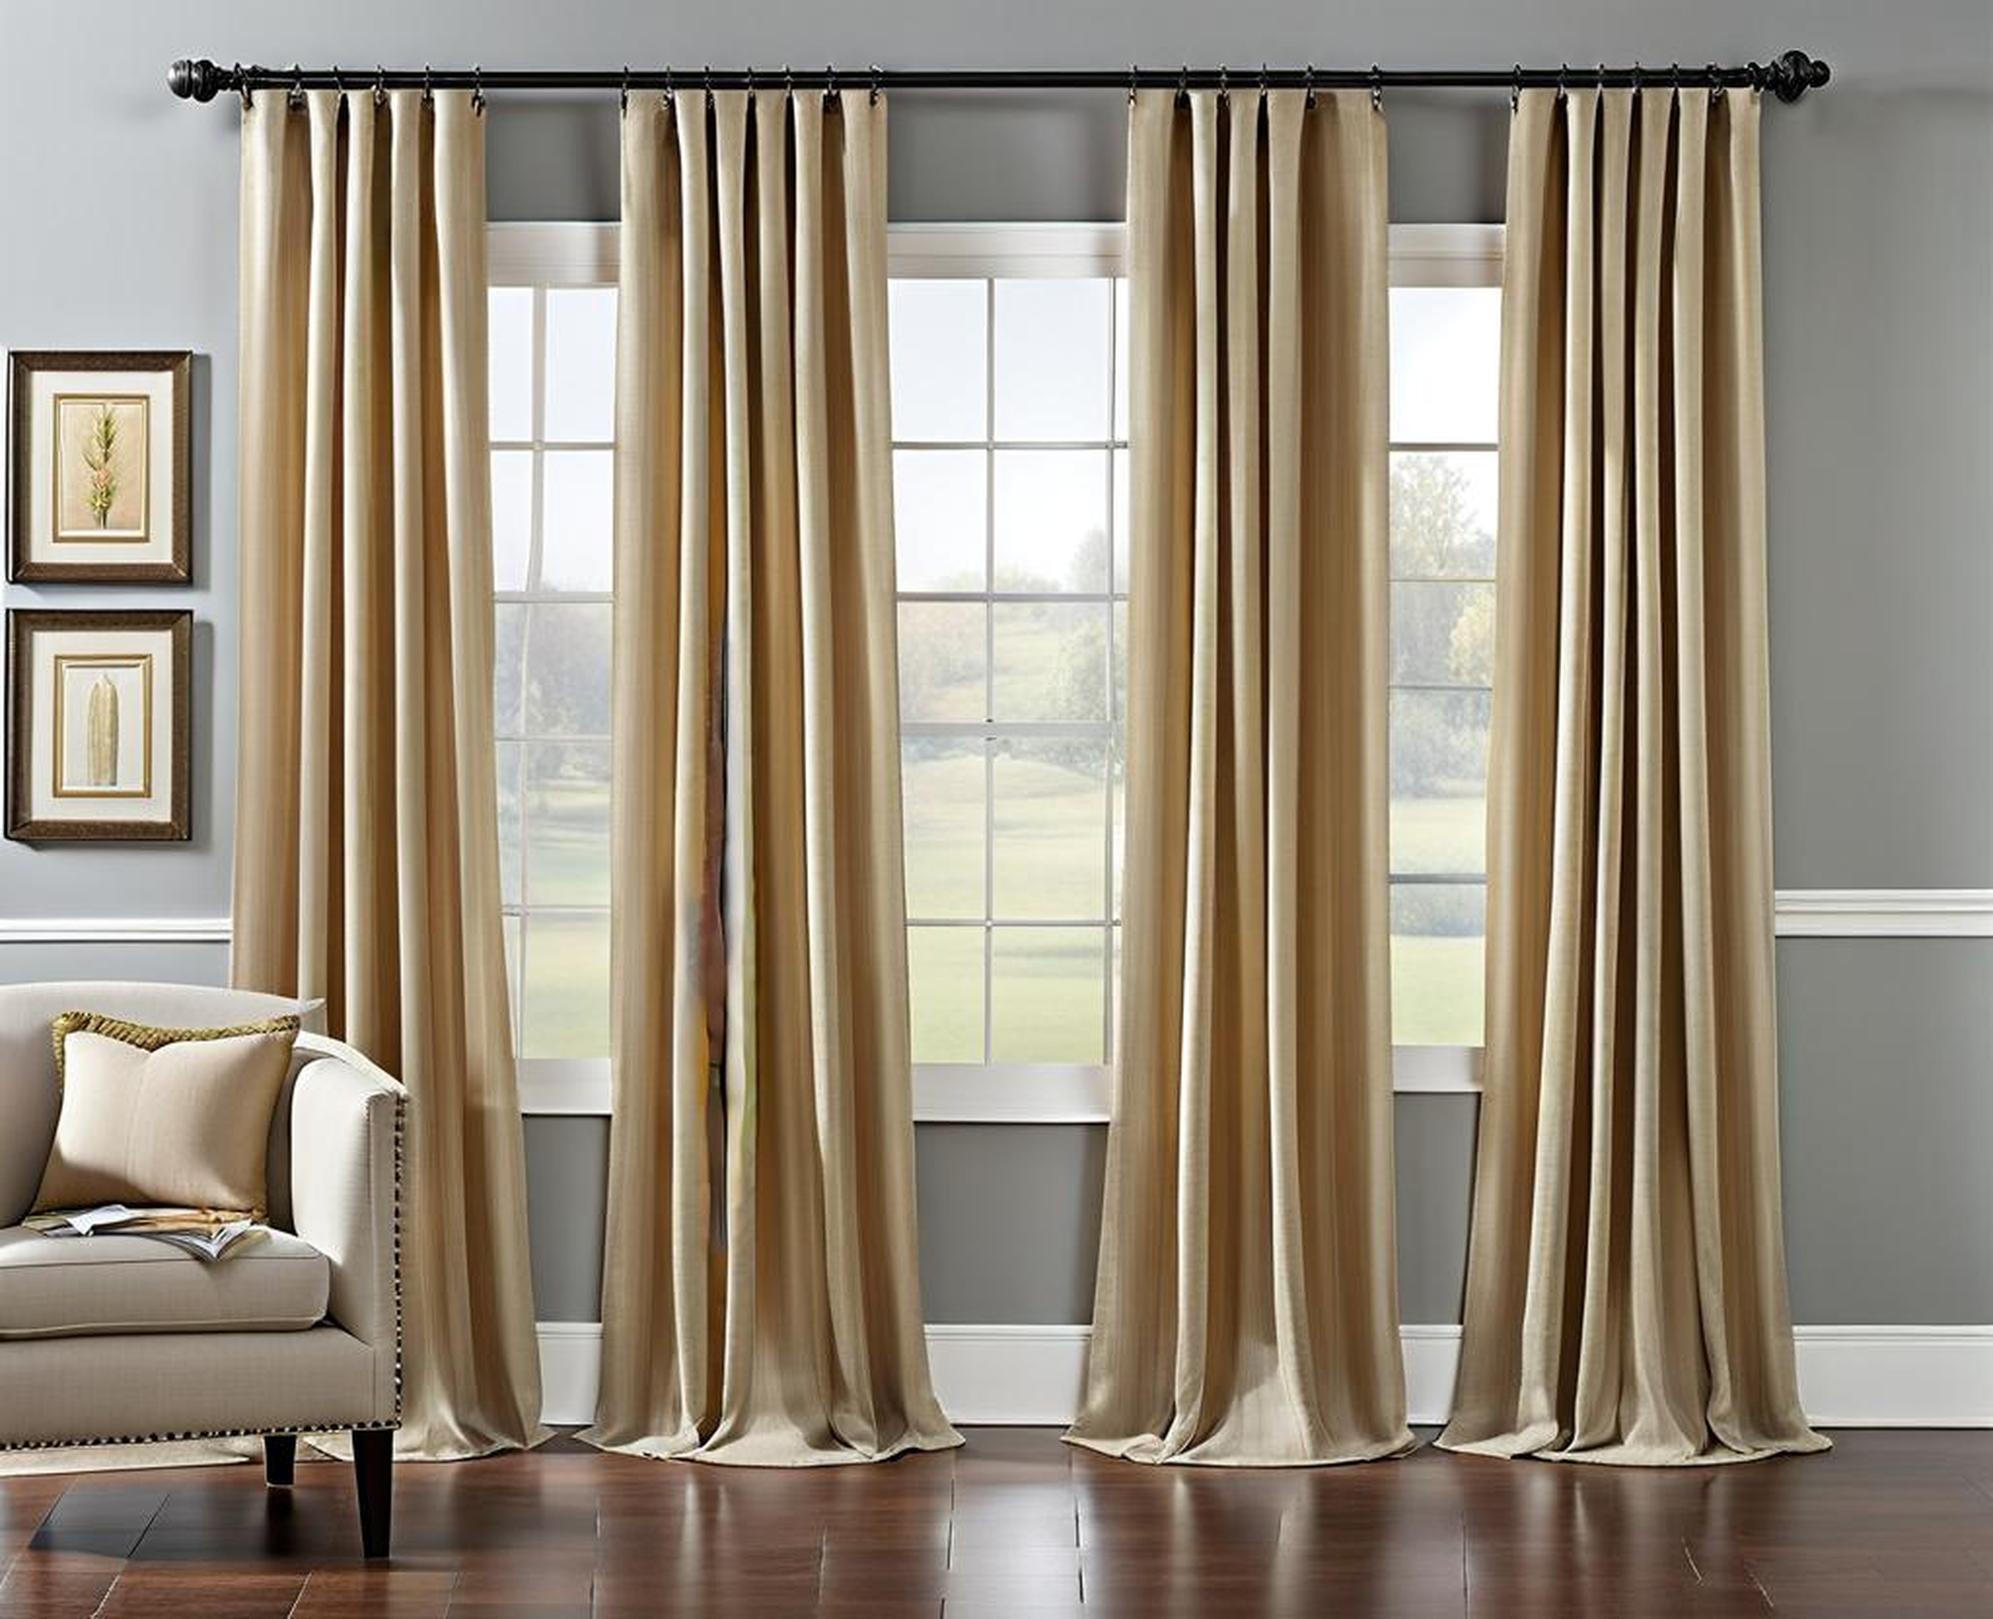 Captivate with the Tranquil Style of Extra Long Sheer Curtains